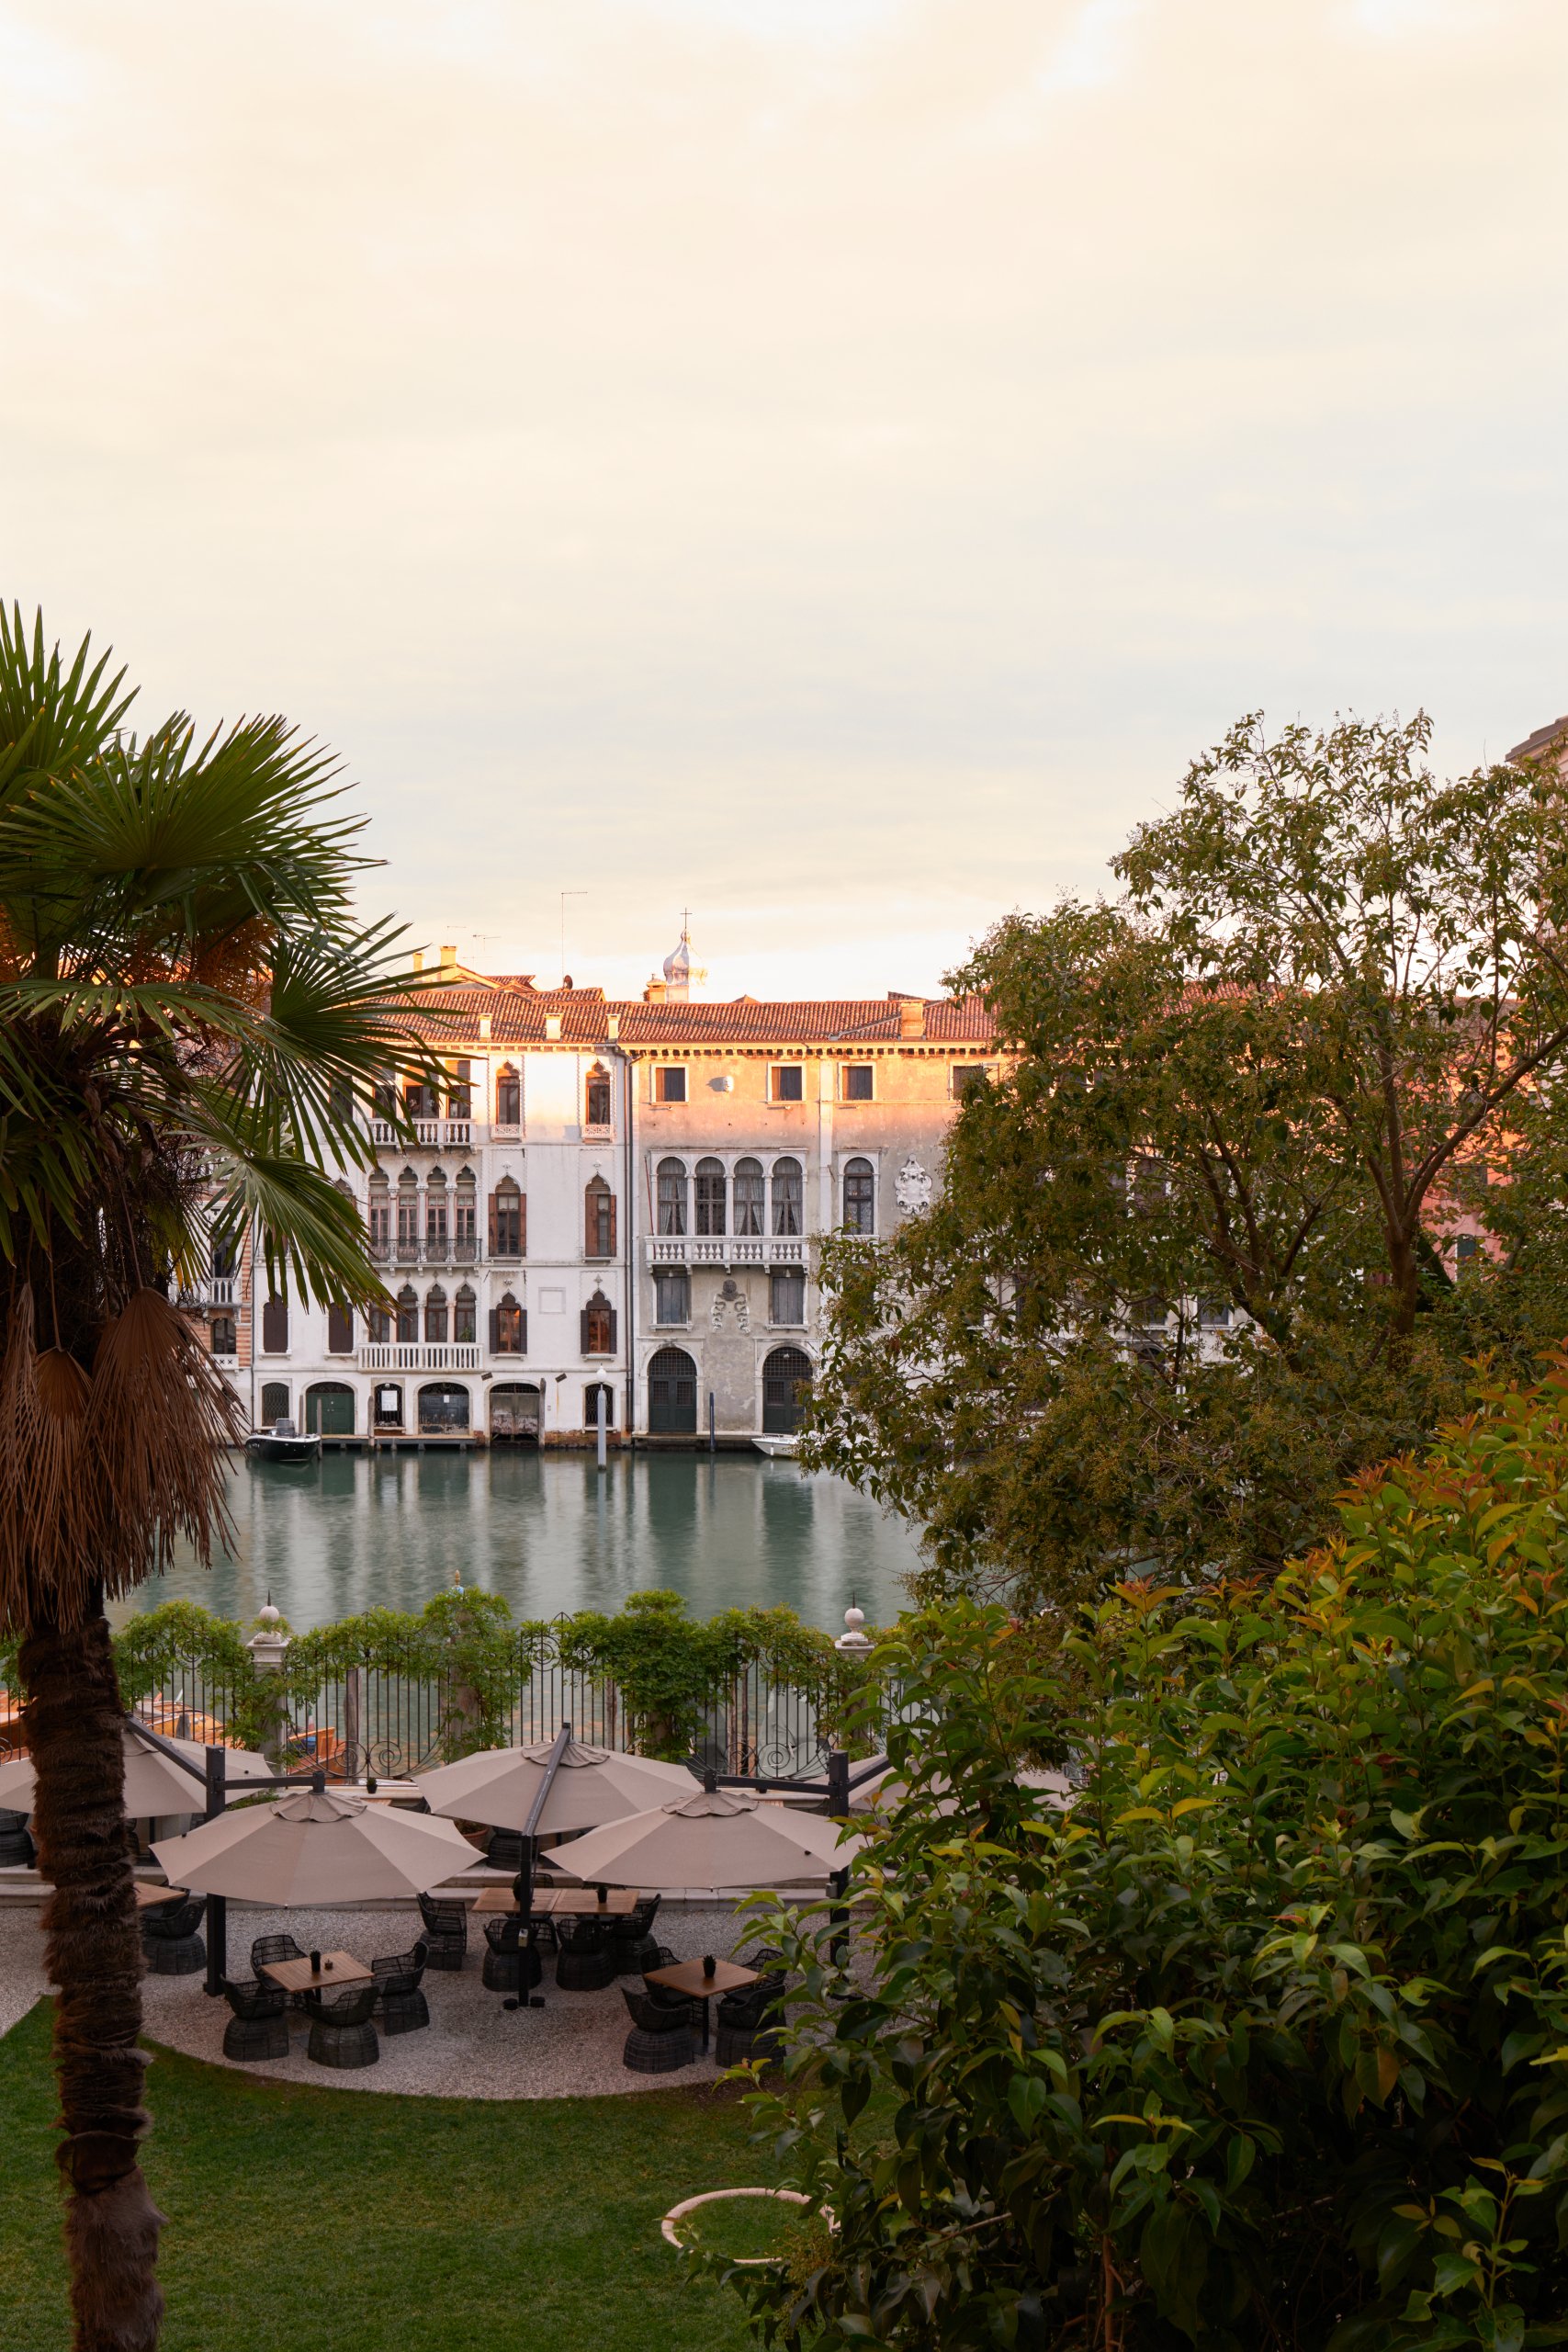 Aman Venice - Accommodation - View from Room 15.tif_30079.jpg